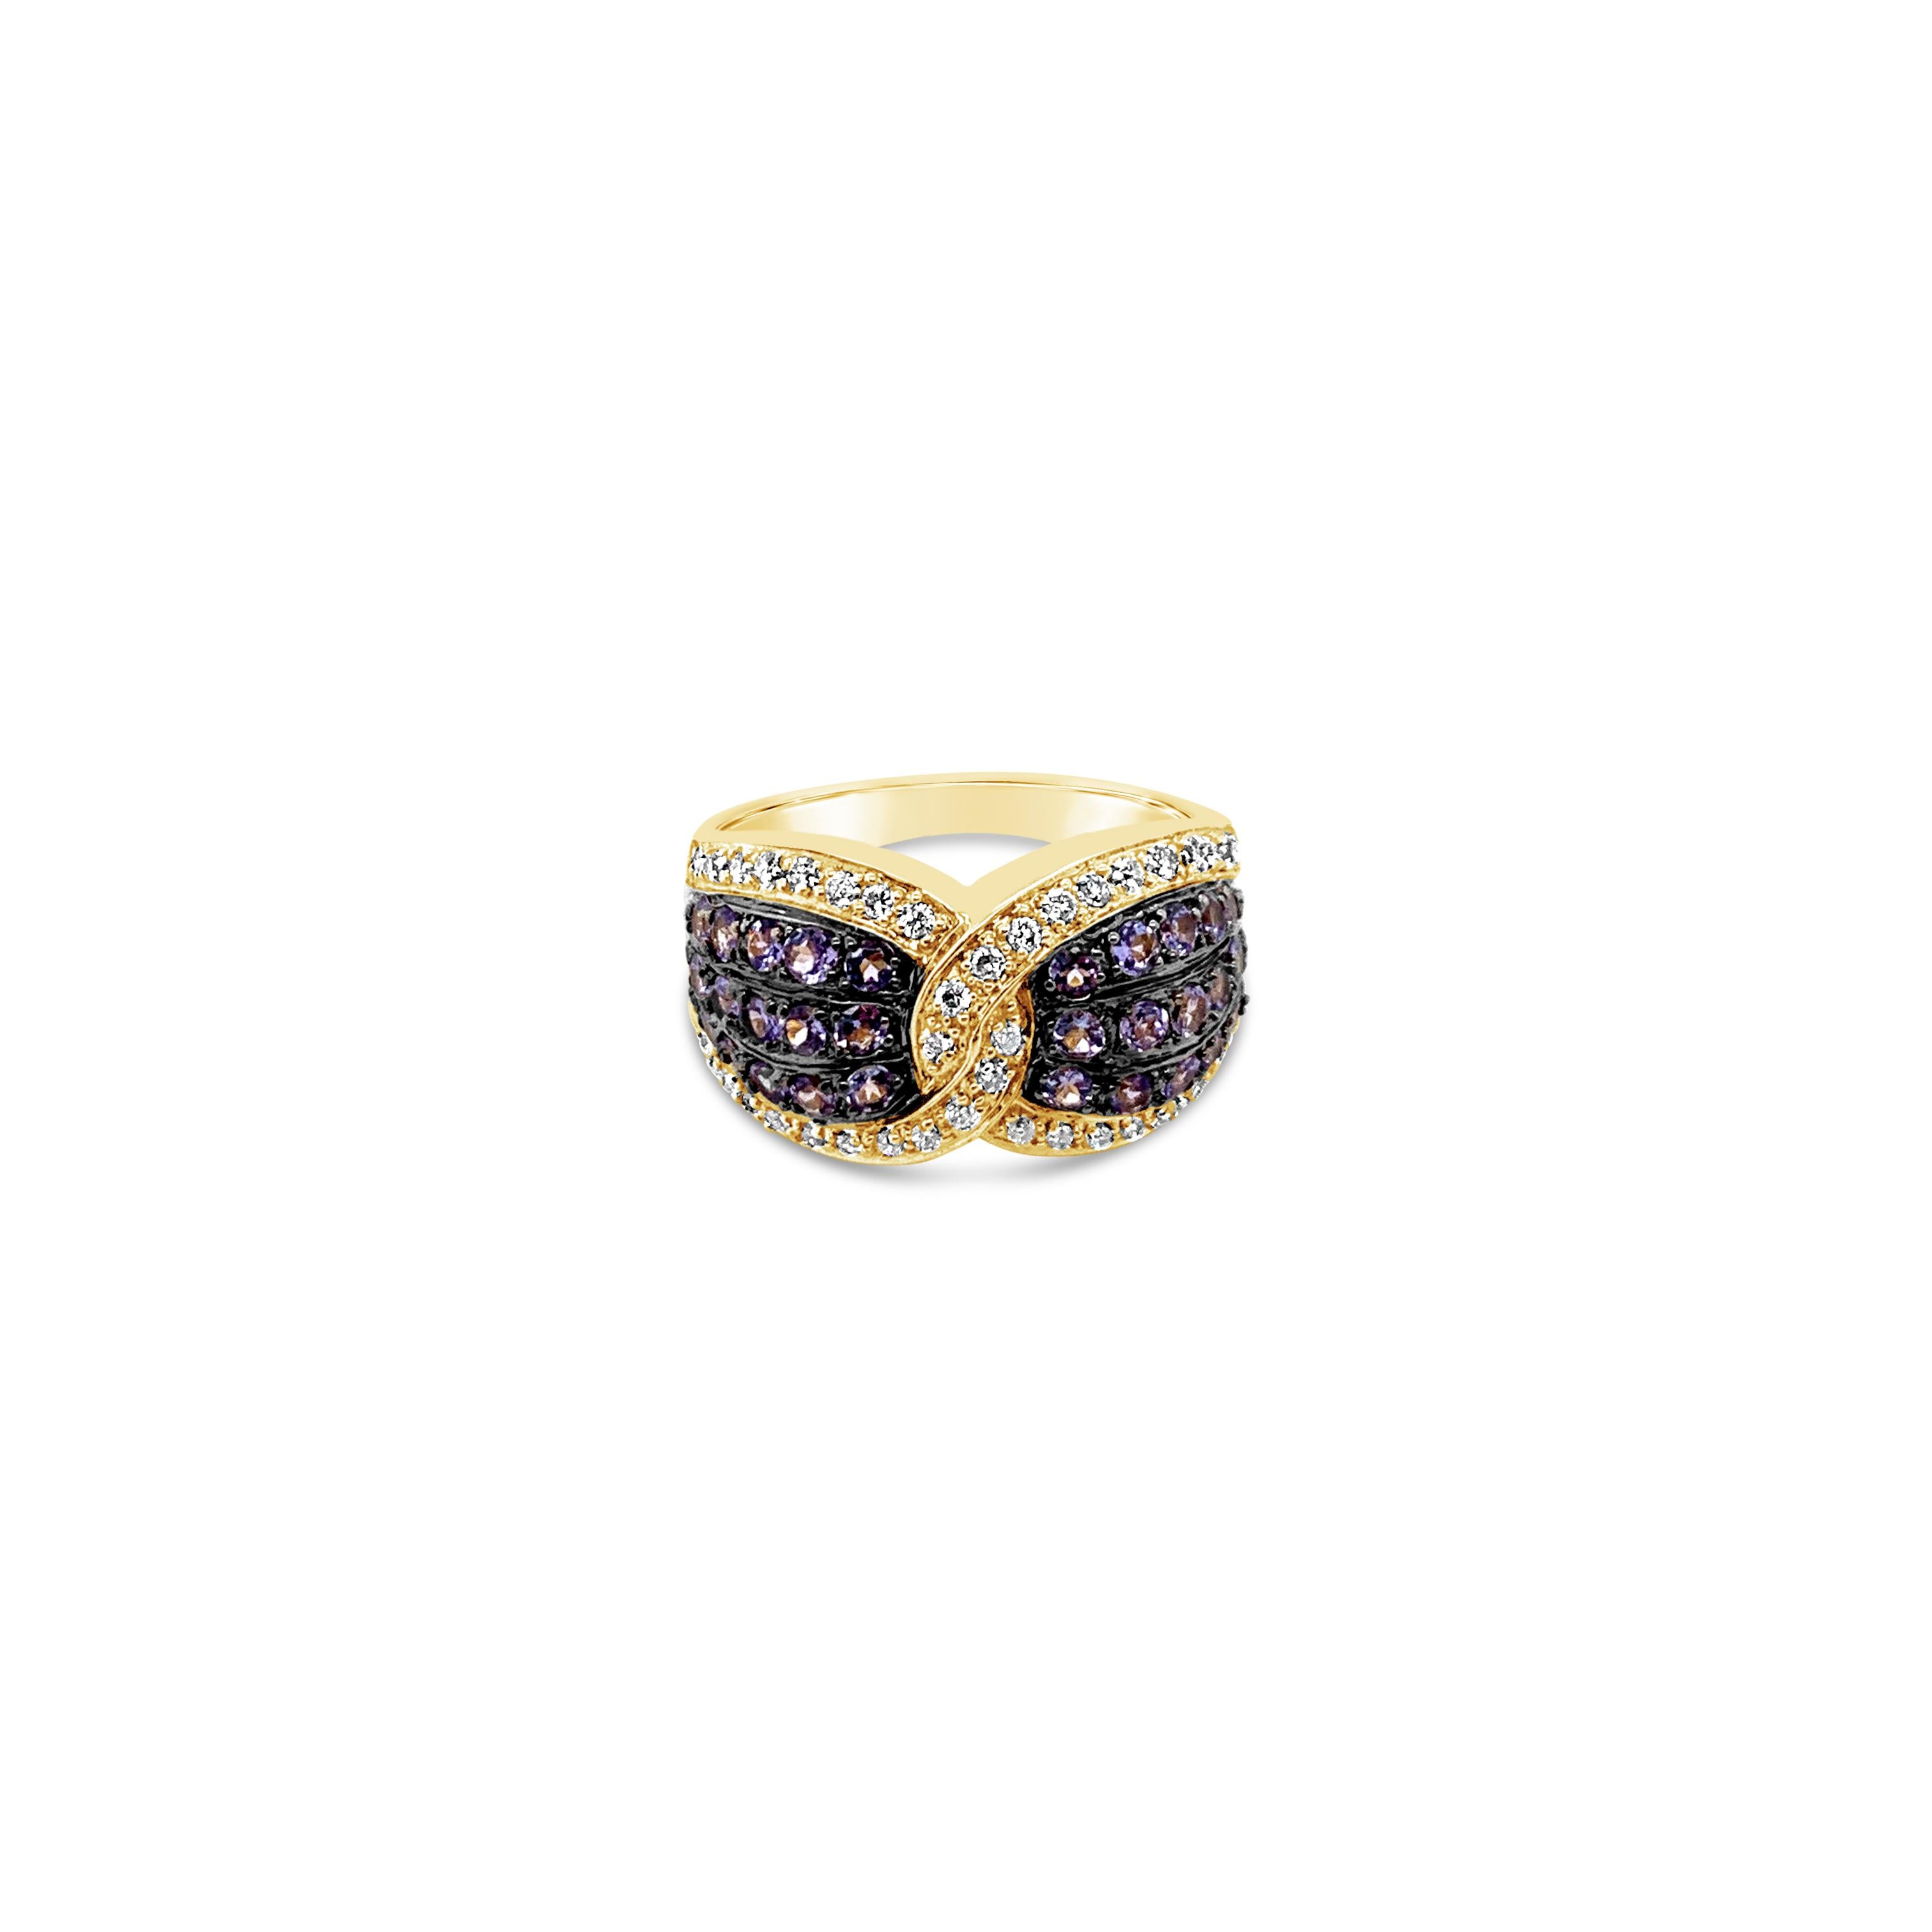 Grand Sample Sale Ring featuring 1 cts. Blueberry Tanzanite®, 1/3 cts. Vanilla Diamonds® set in 14K Honey Gold™